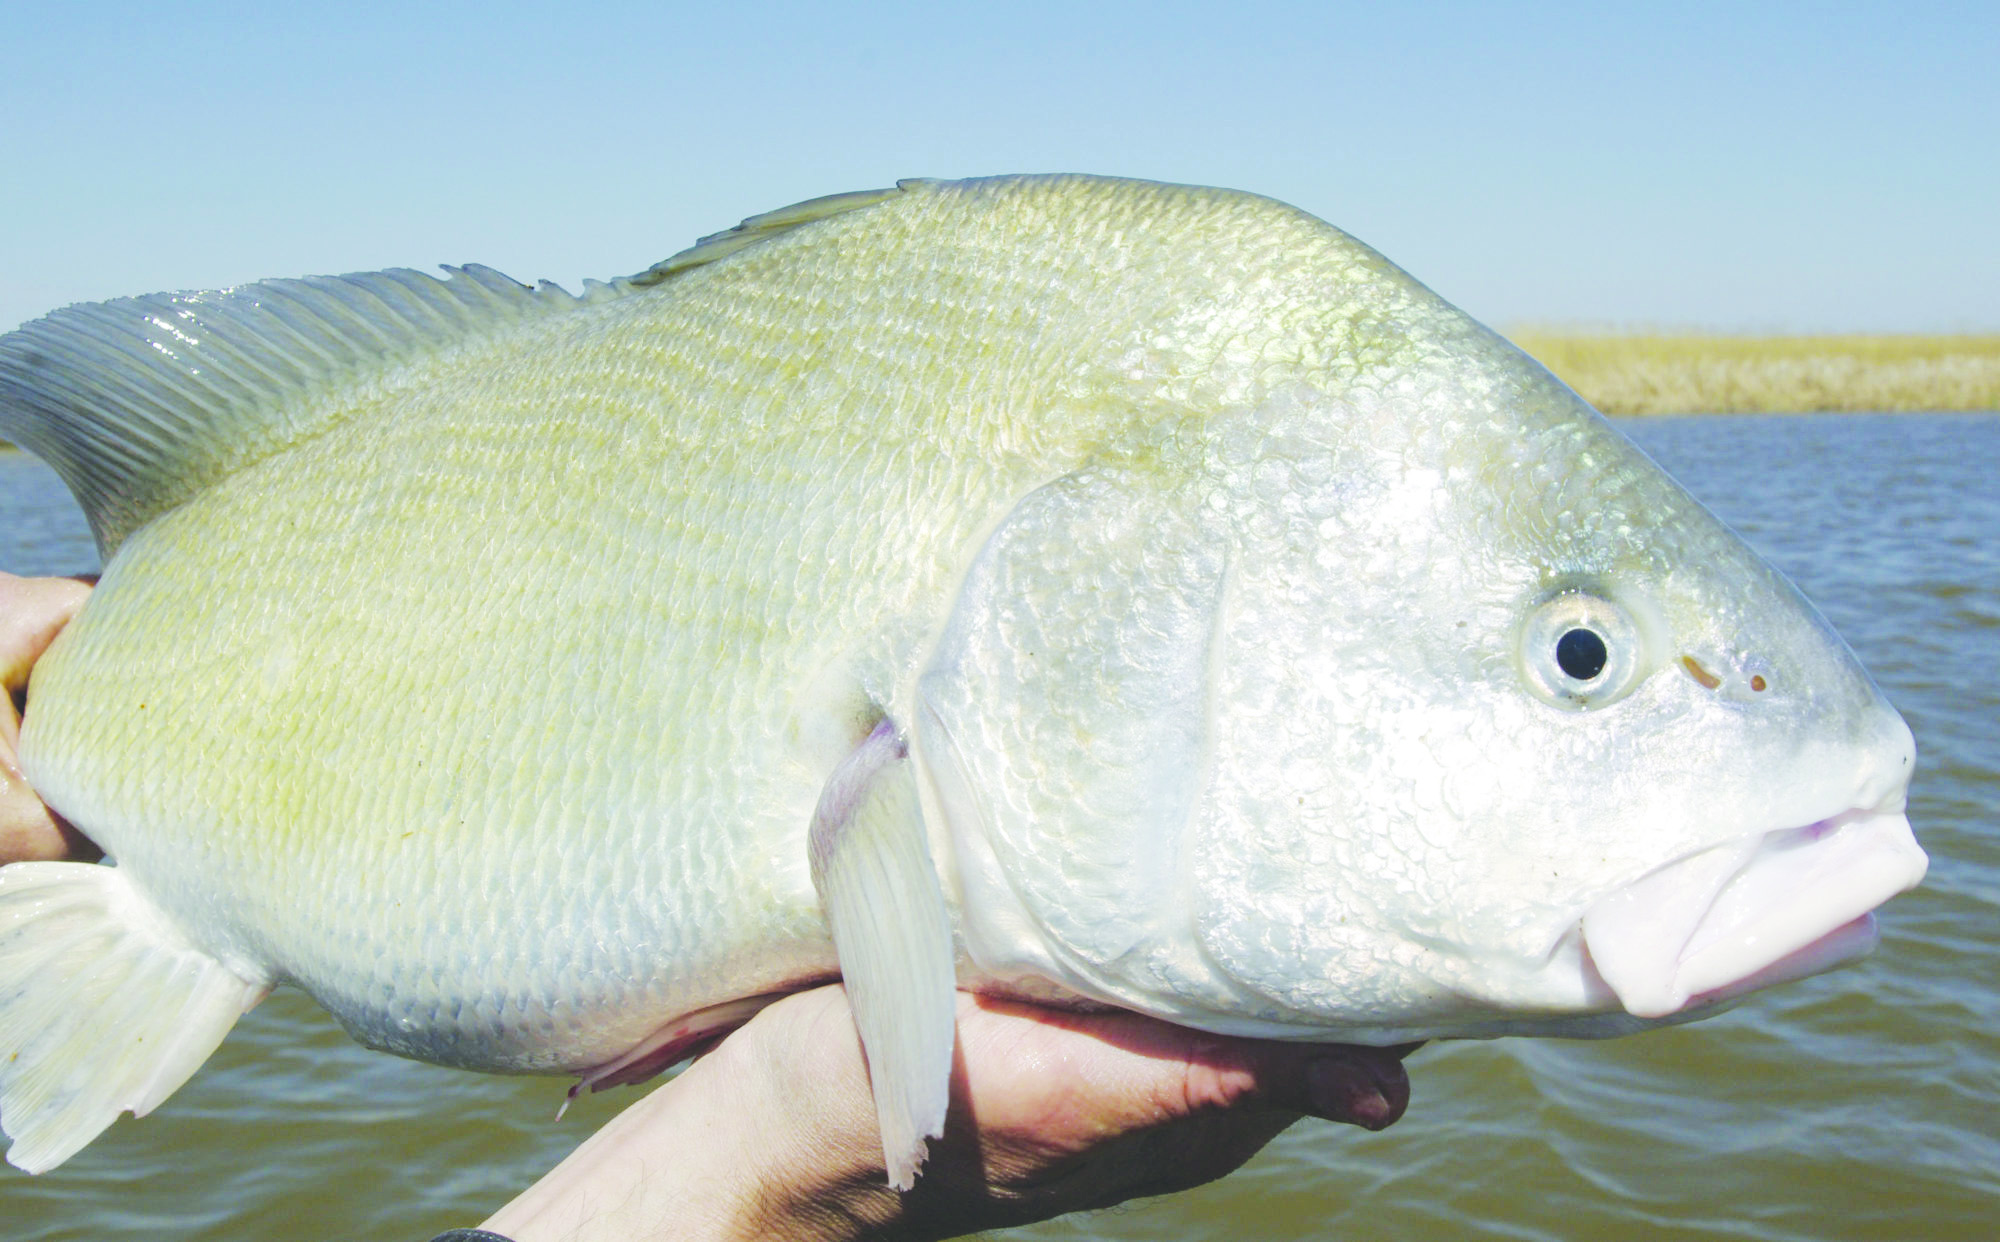 Good angling can be gutted when facing 'G' fish - Minden Press-Herald